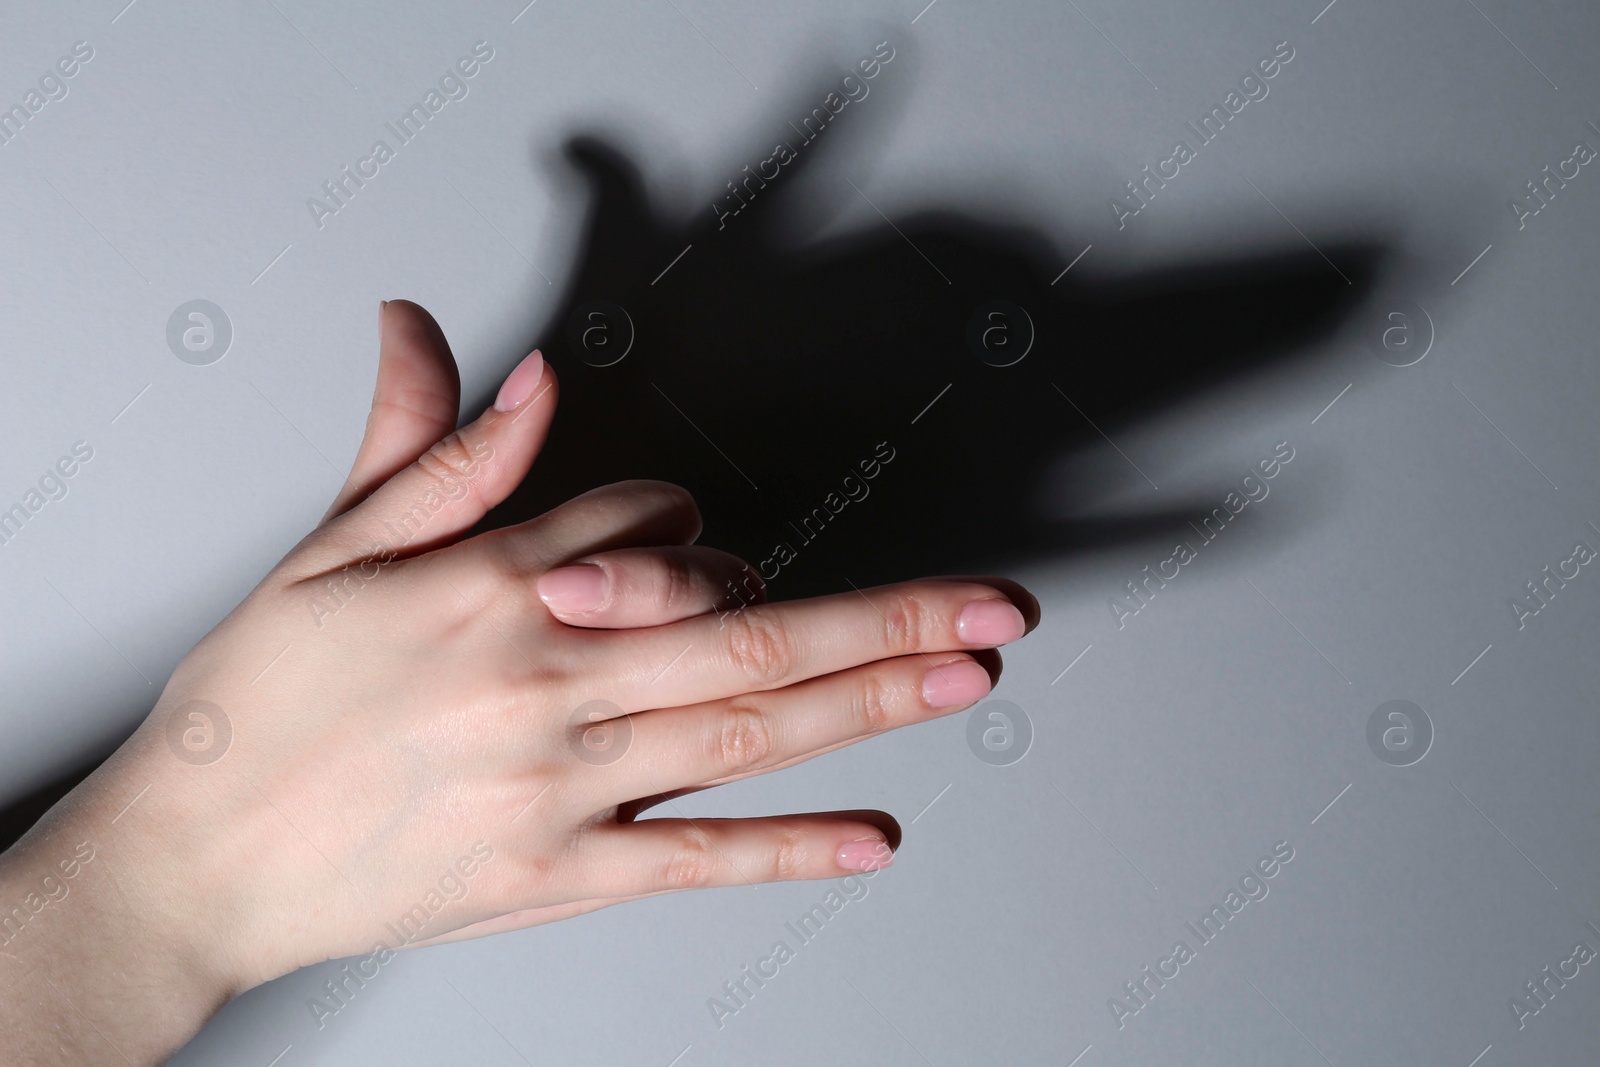 Photo of Shadow puppet. Woman making hand gesture like dog on grey background, closeup